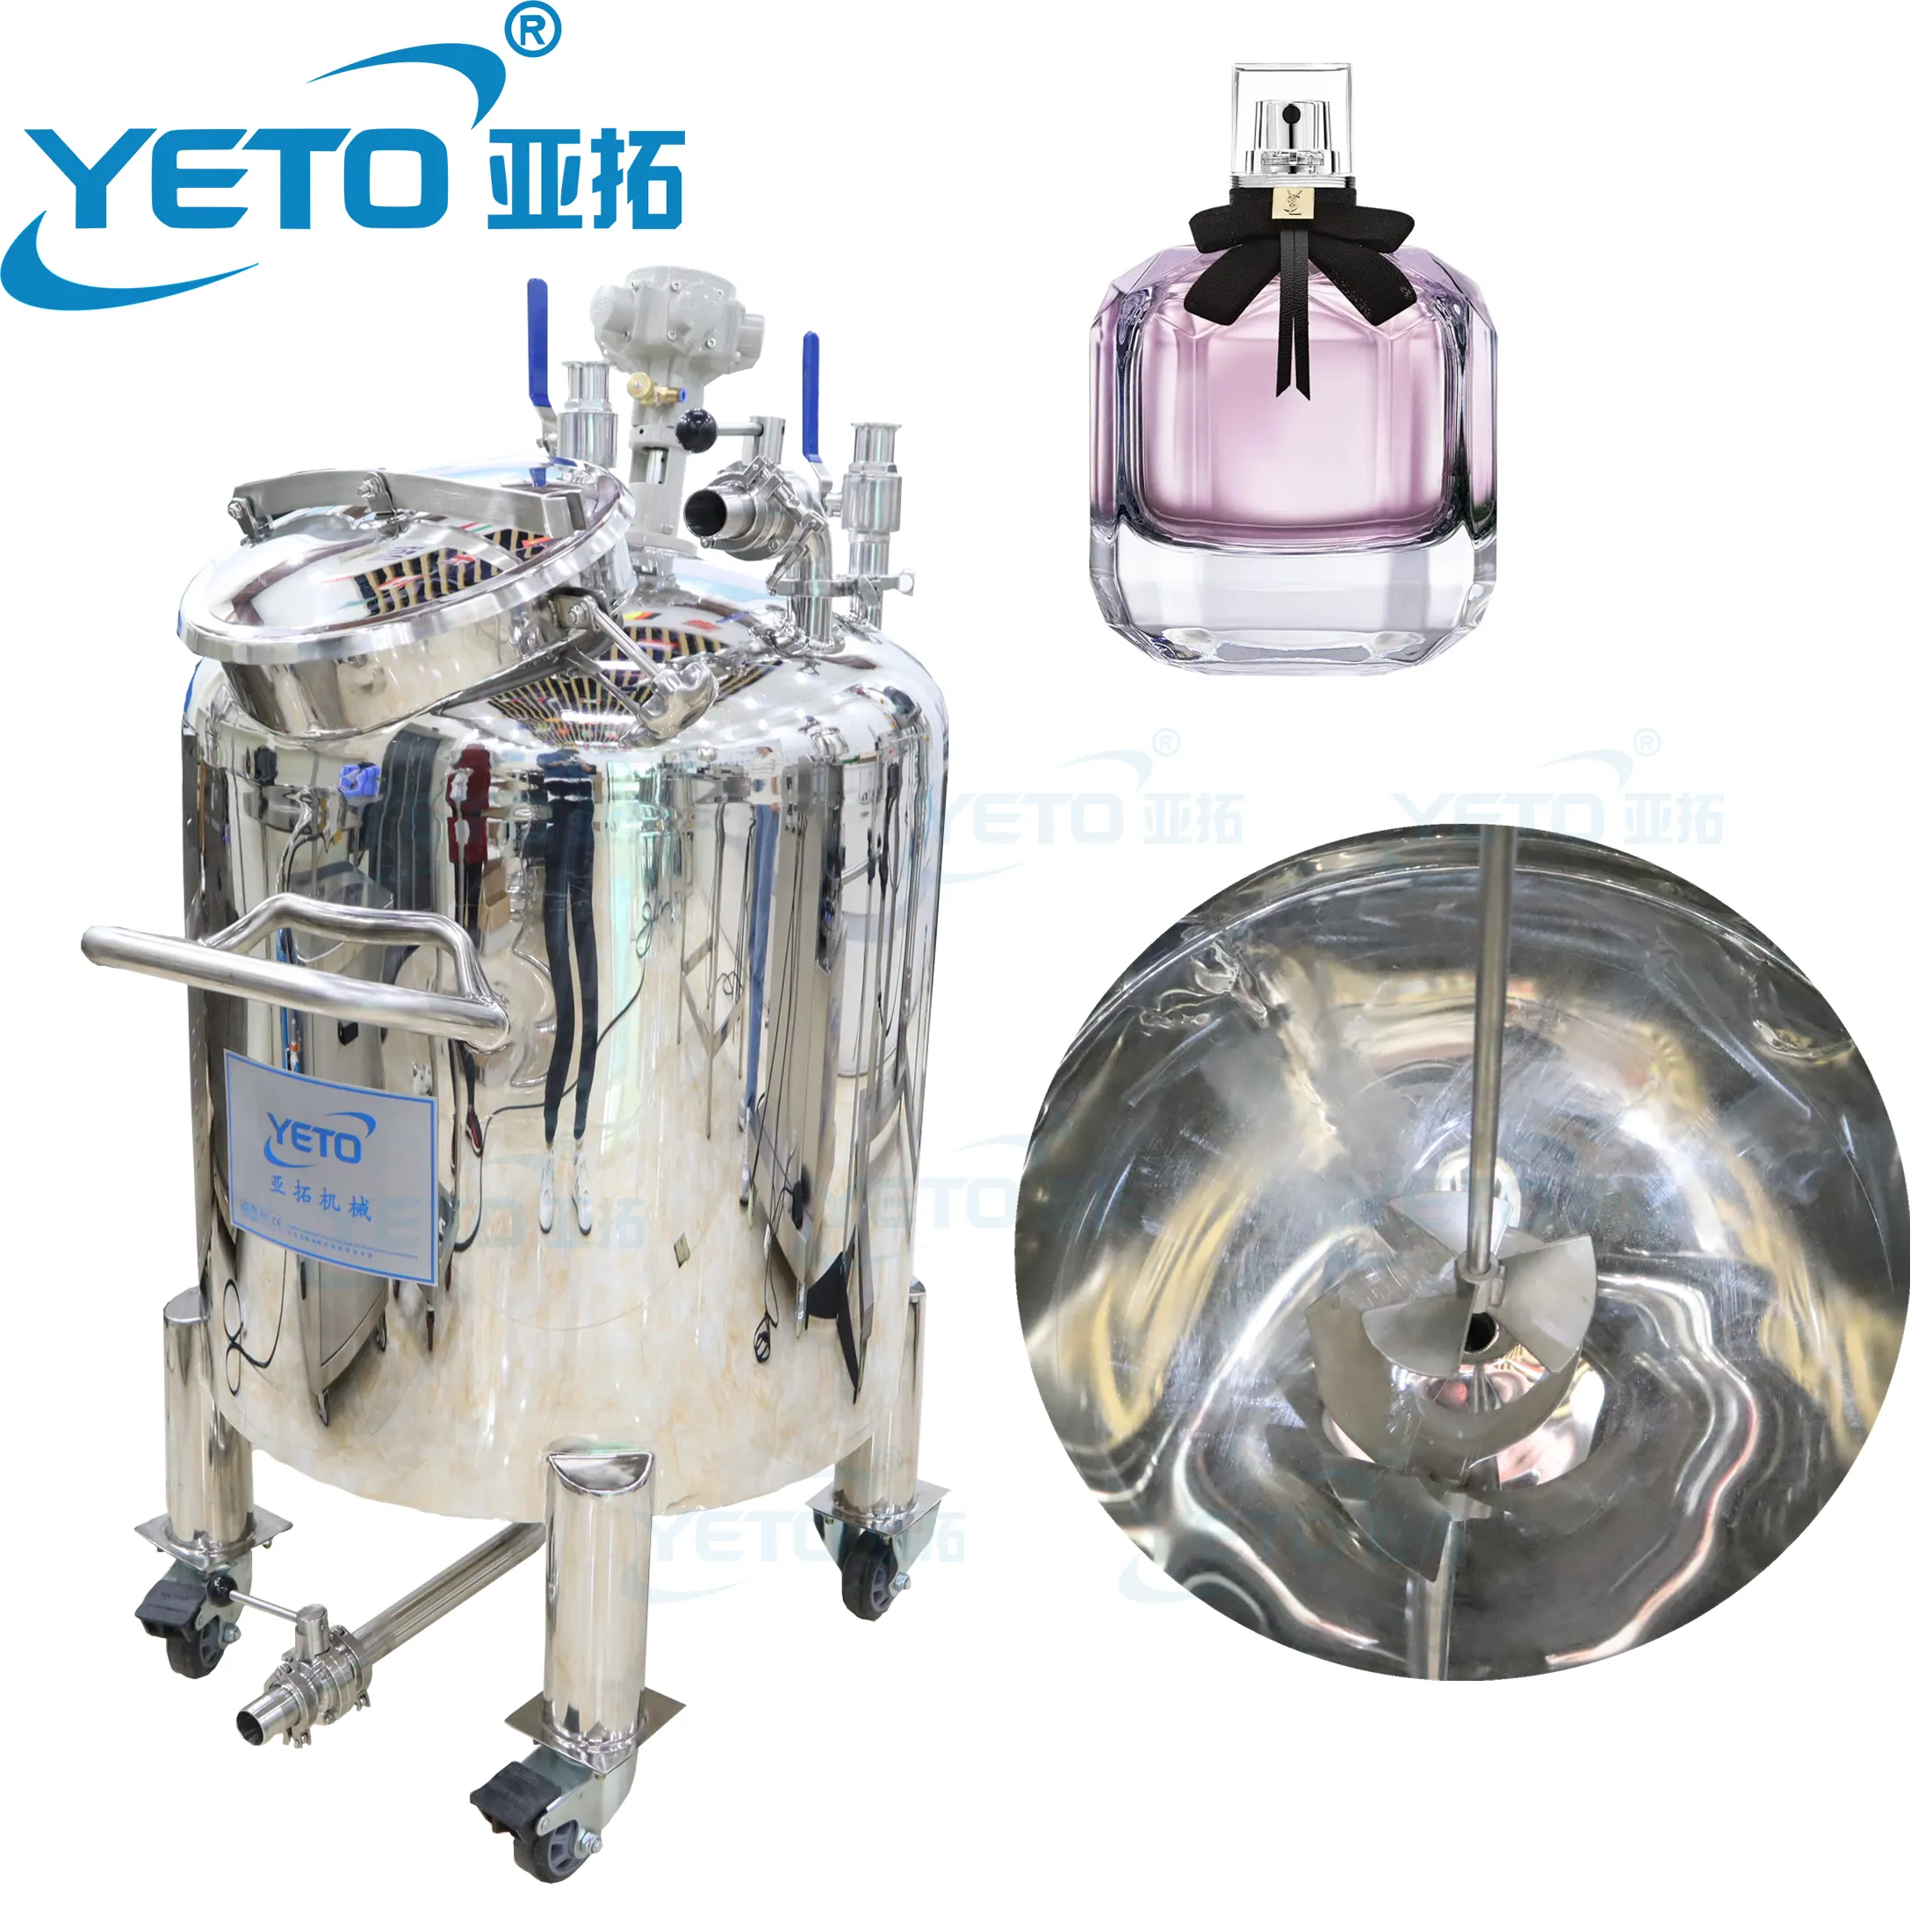 YETO-Perfume Making Machine Production Line Perfume Manufacturing Mixing Tank With Filter Fragrance Machine Mixer Perfume Mixing